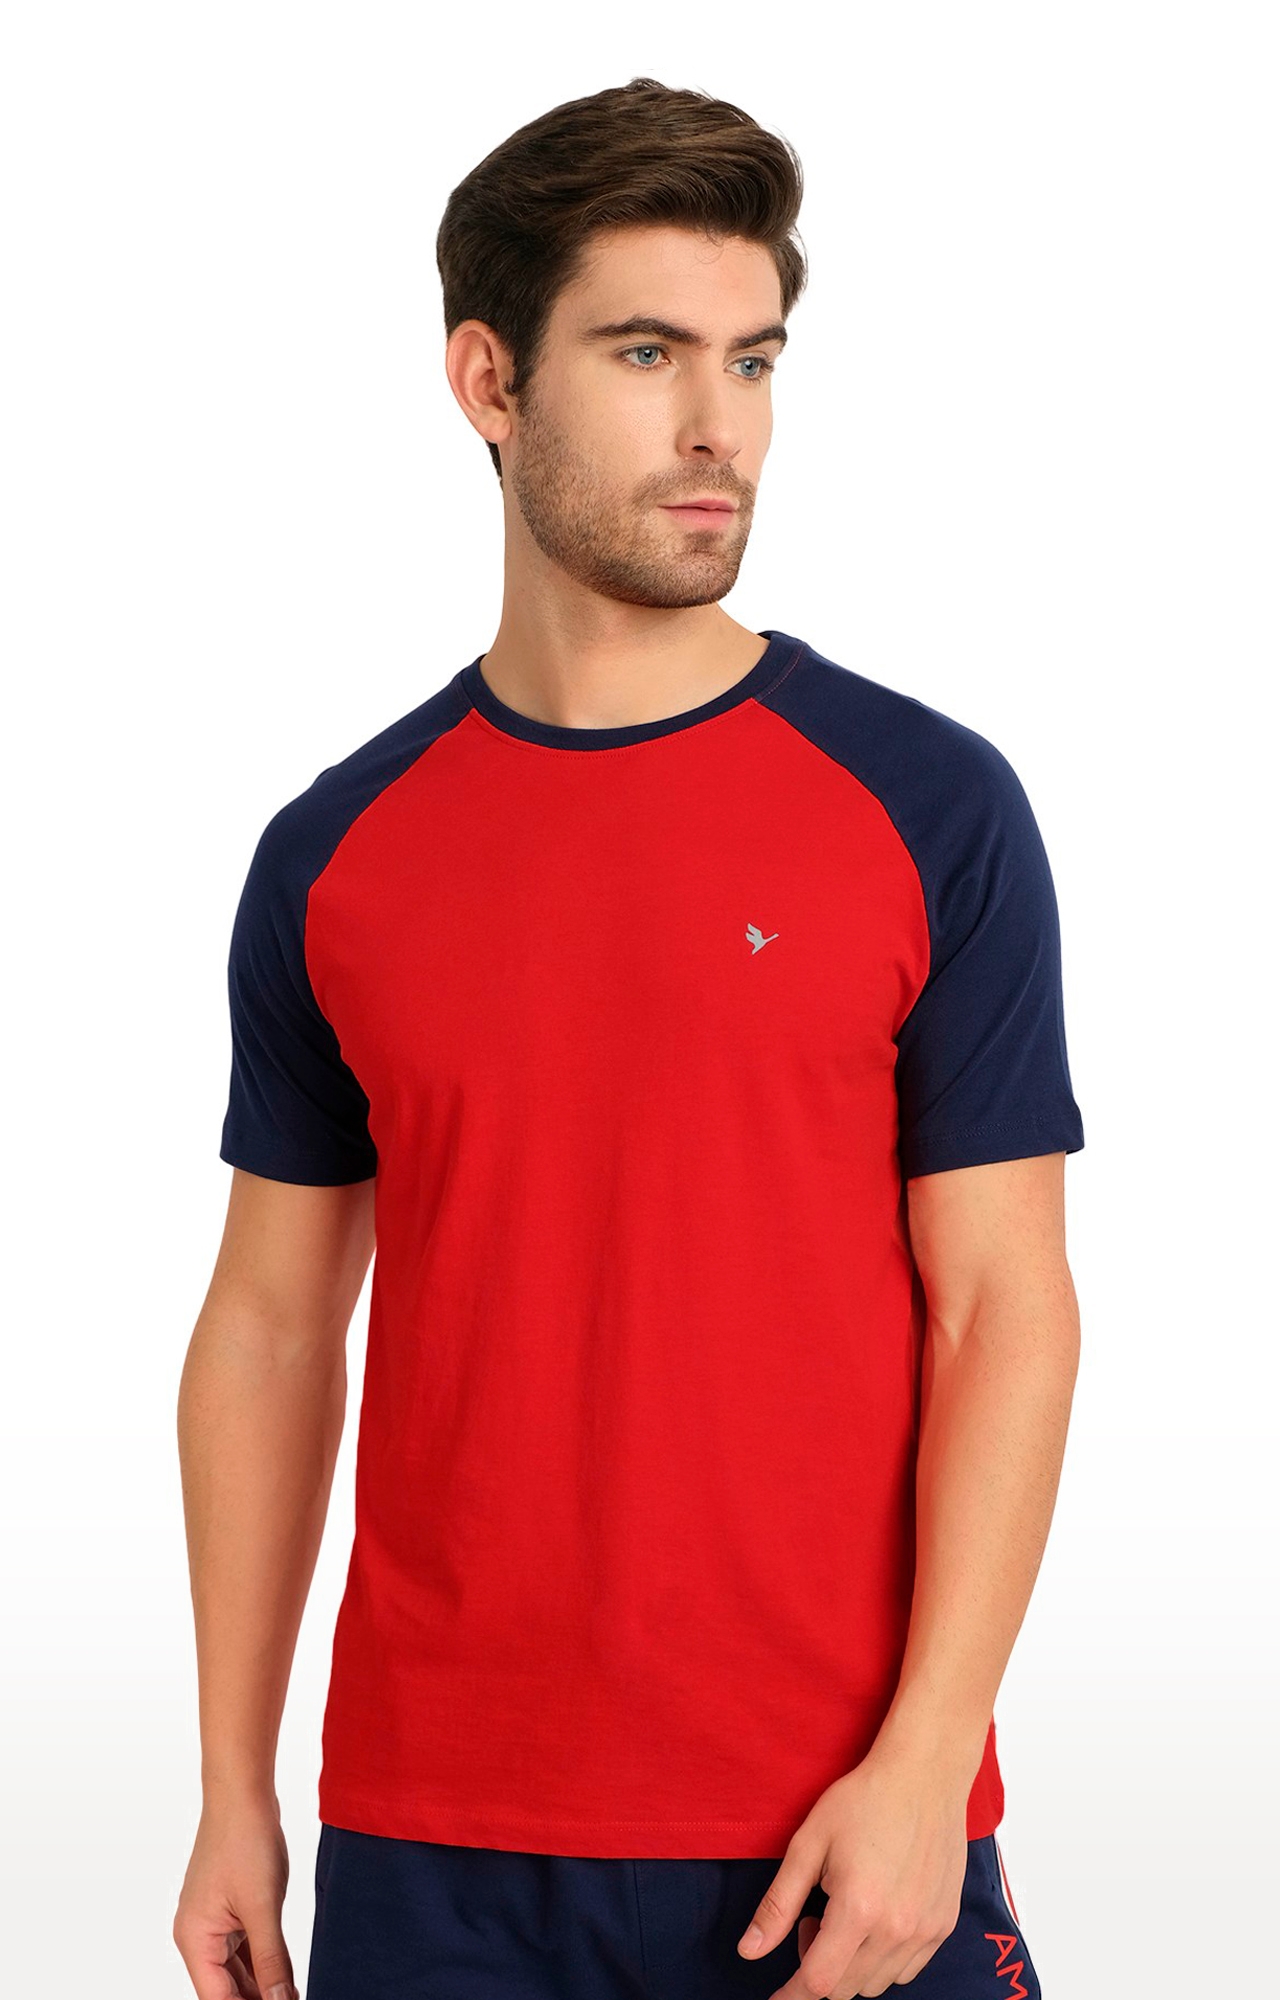 Men's Red and Blue Cotton Solid Regular T-Shirt